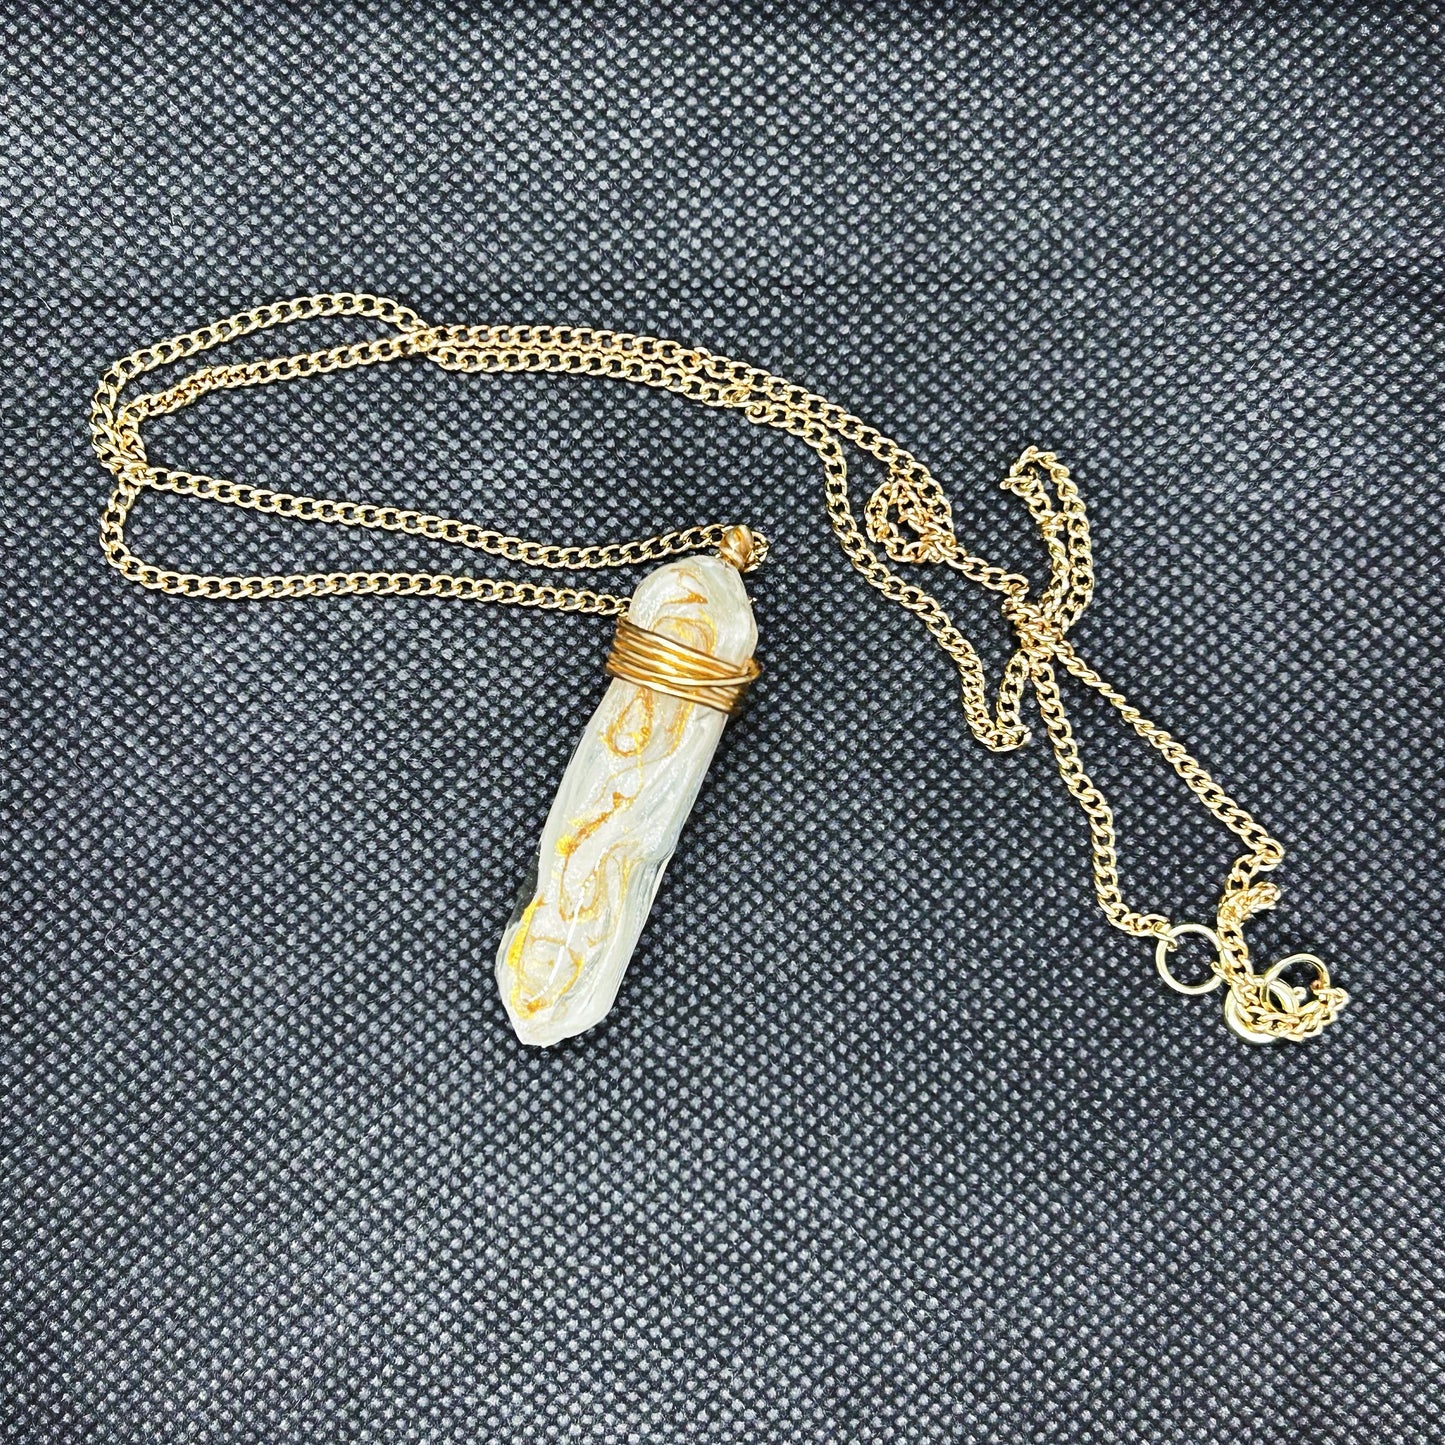 Kyber Crystal Necklace